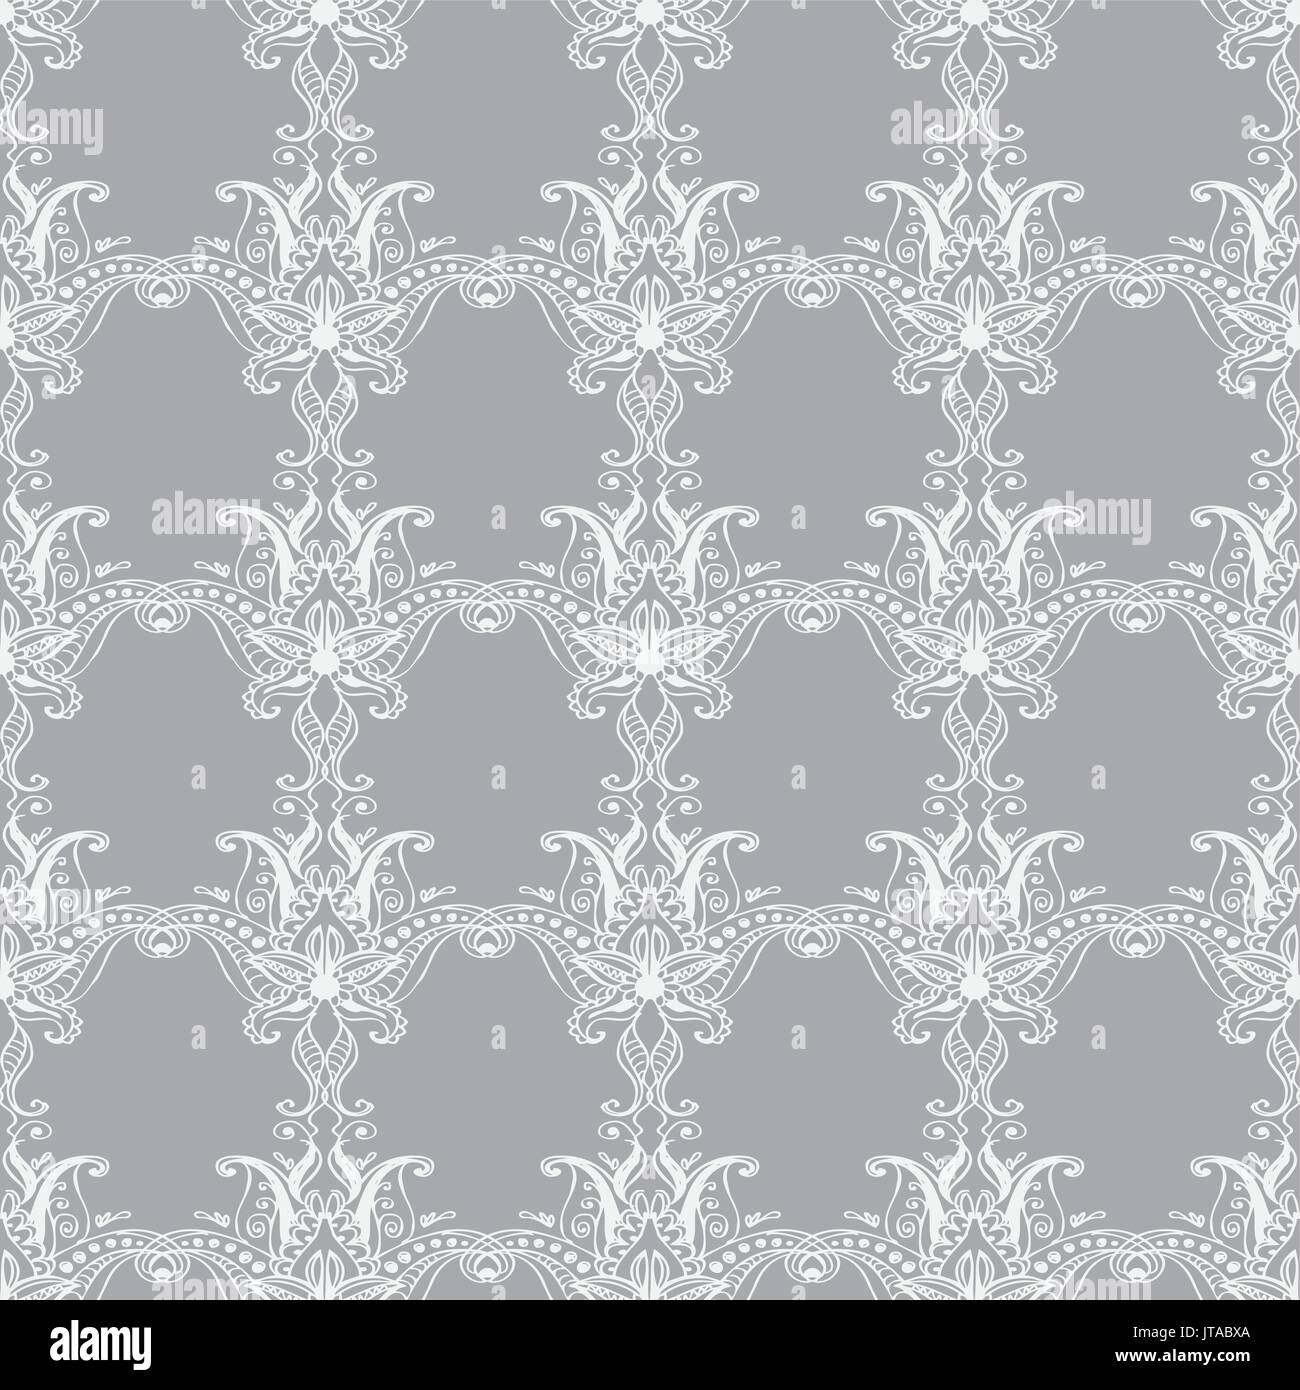 Seamless pattern with ornamental flowers Stock Vector